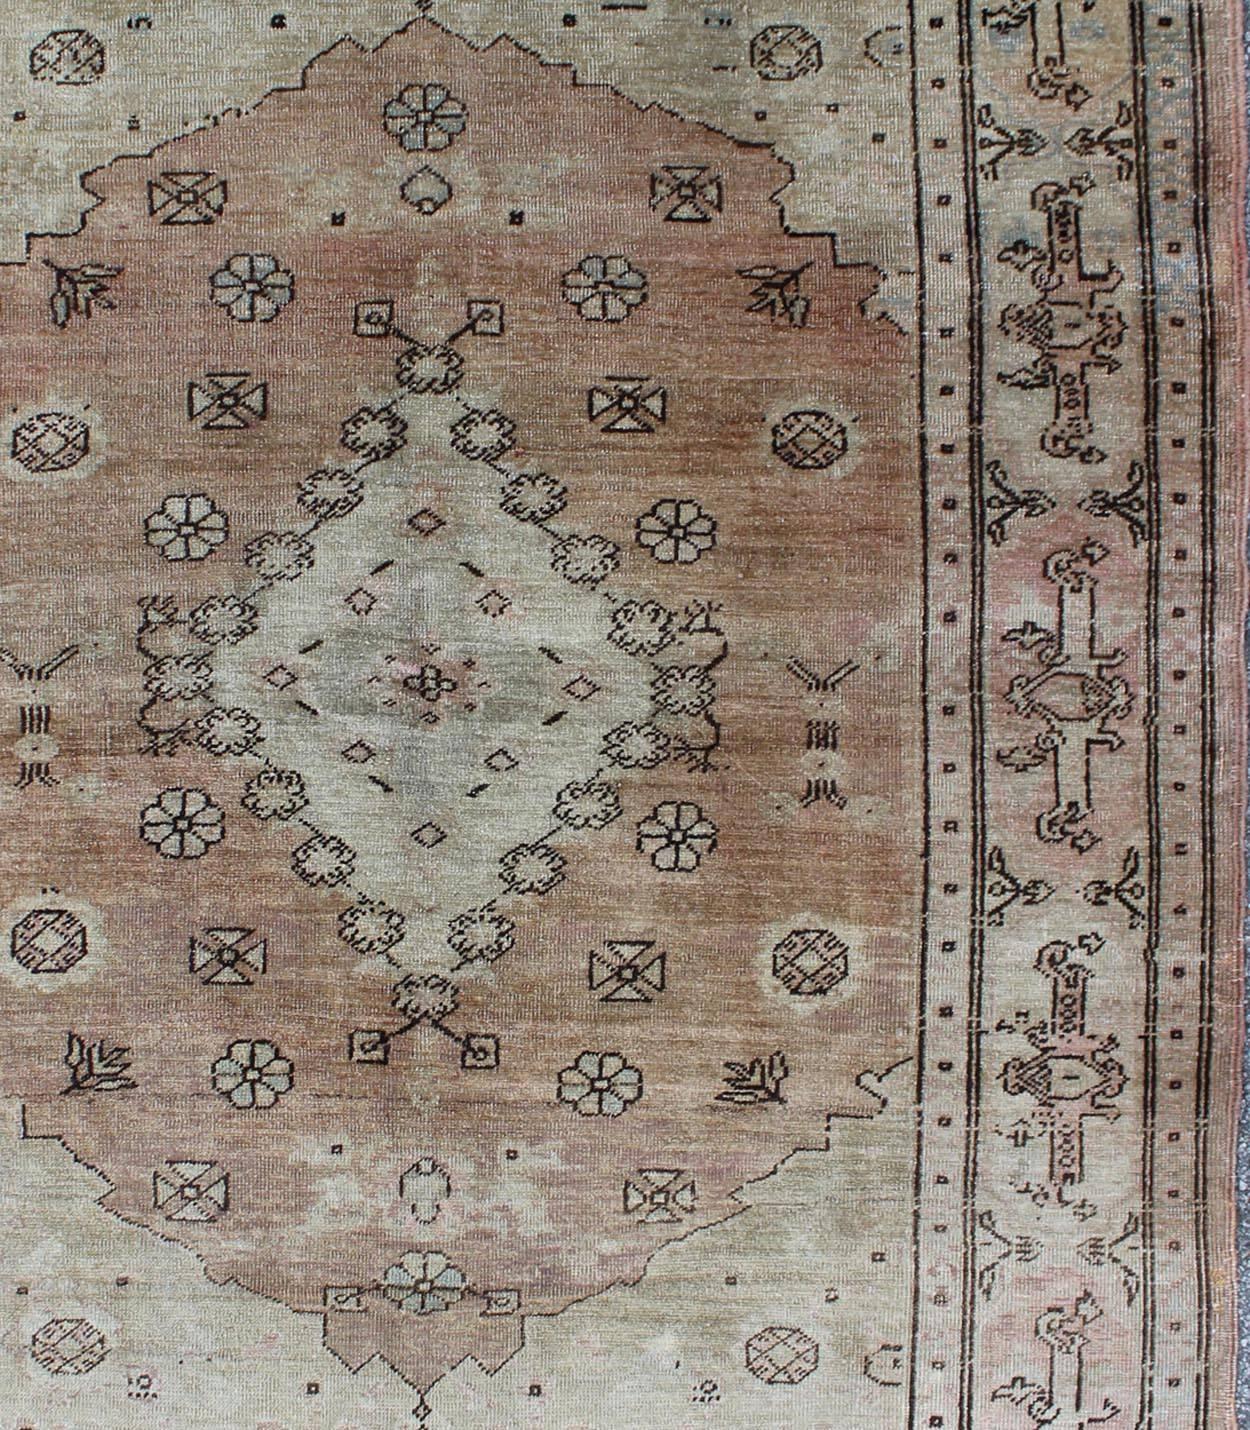 Hand-Knotted Antique Turkish Sivas Fine Rug in Light Tones with florals and Geometrics